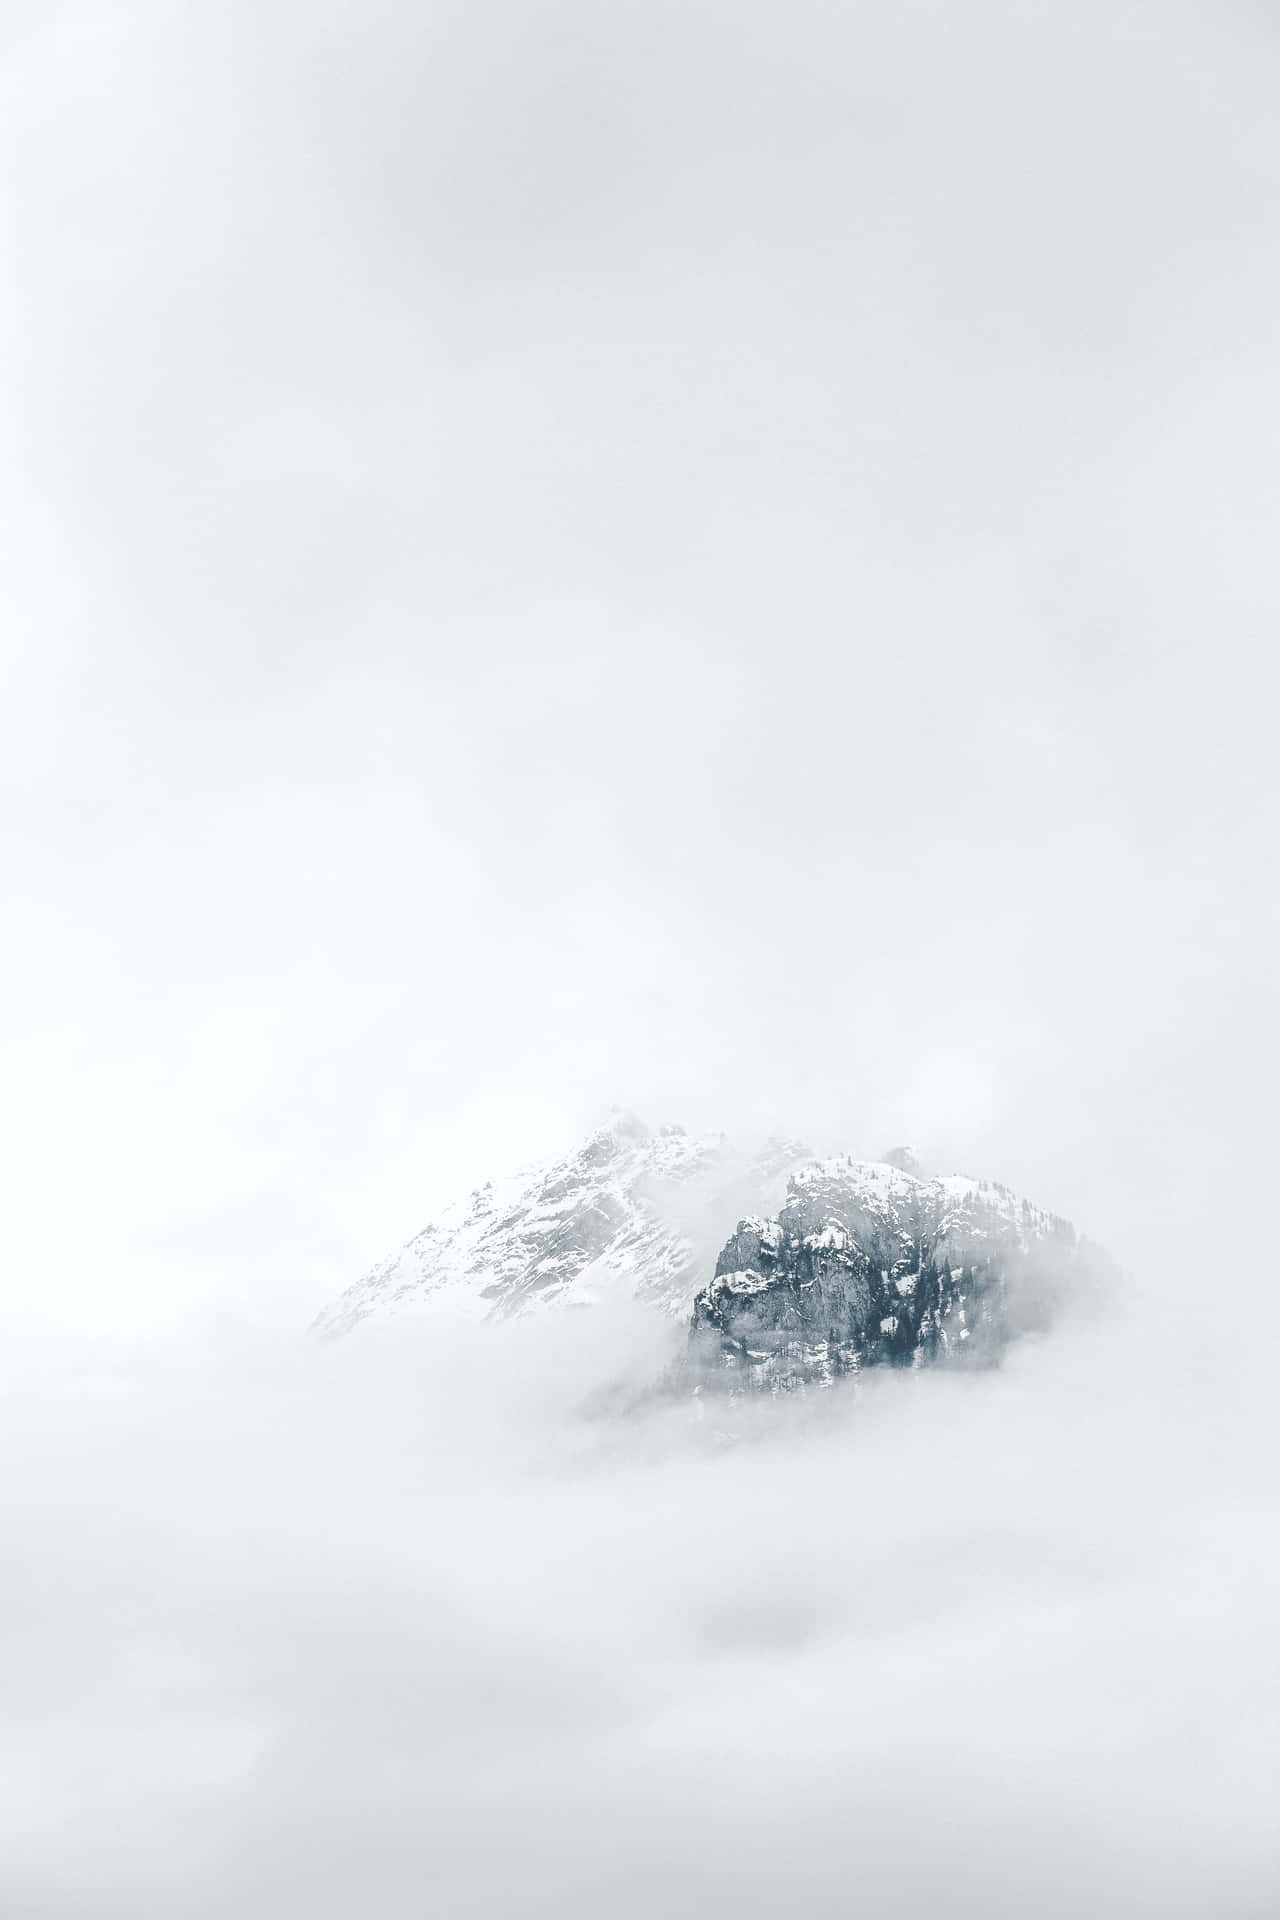 A Mountain Covered In Clouds With Snow On Top